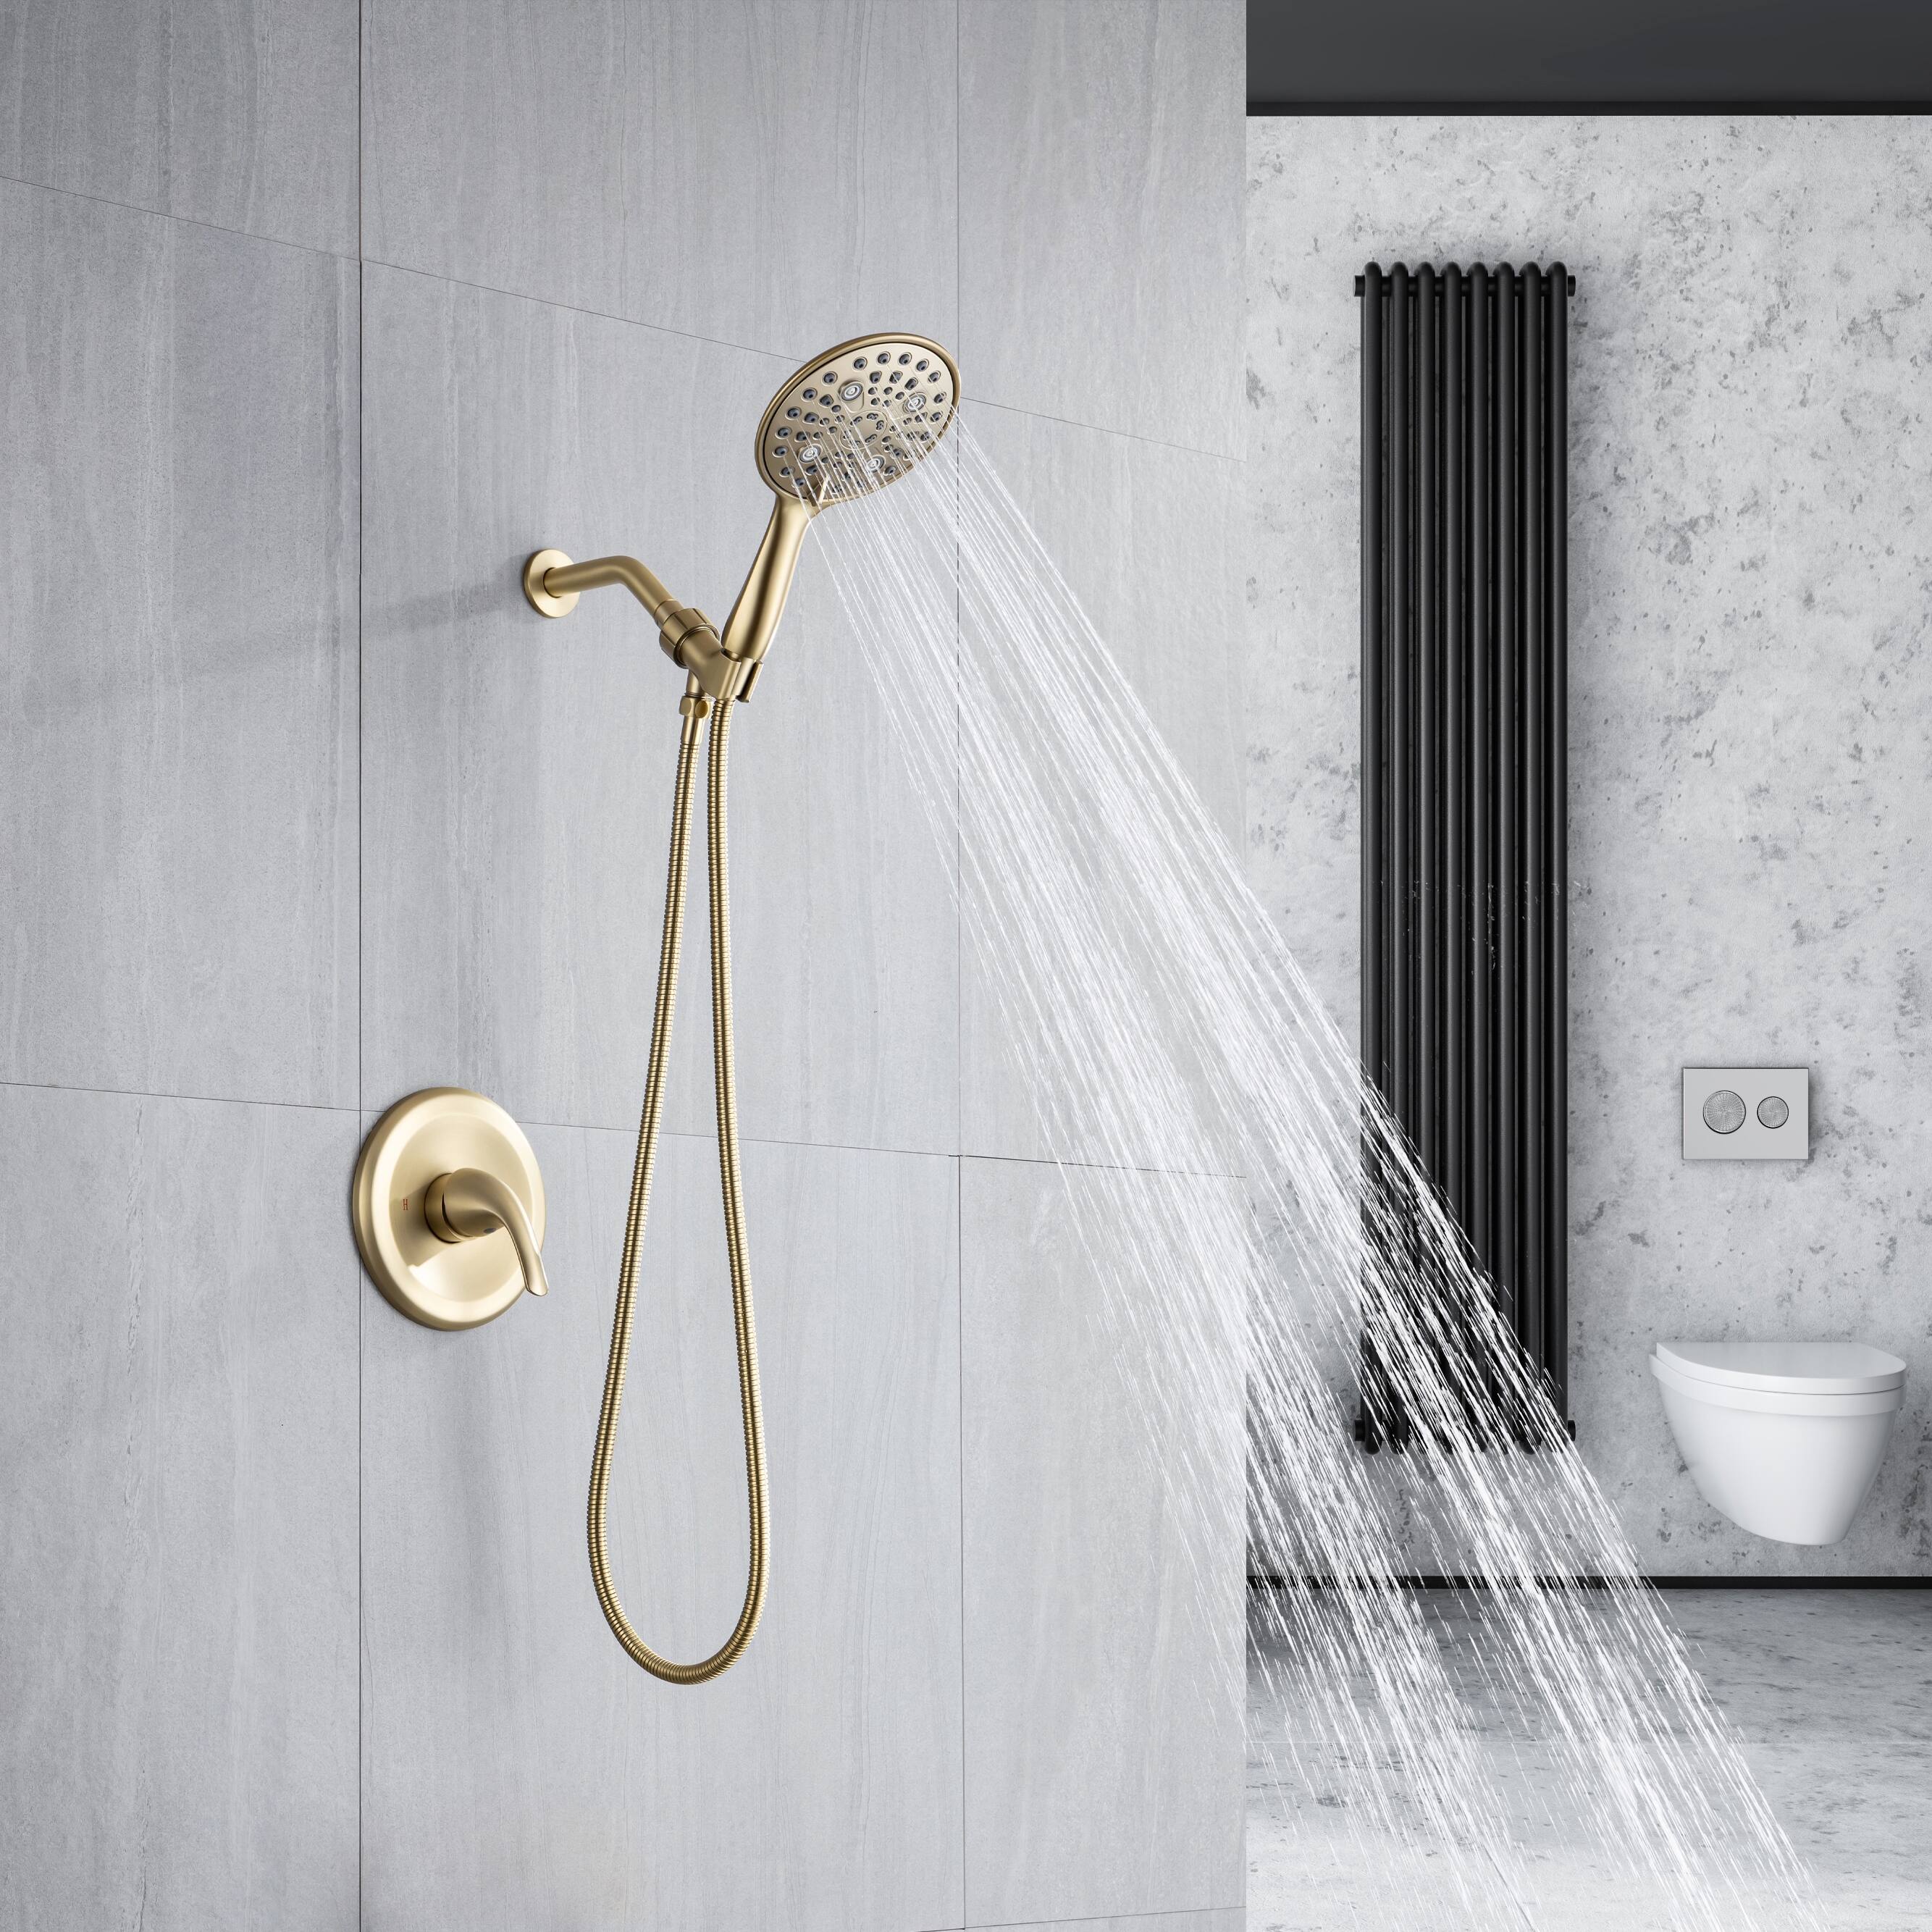 6 In. Detachable Handheld Shower, Temperature Control , Brushed Gold Finish with Brass